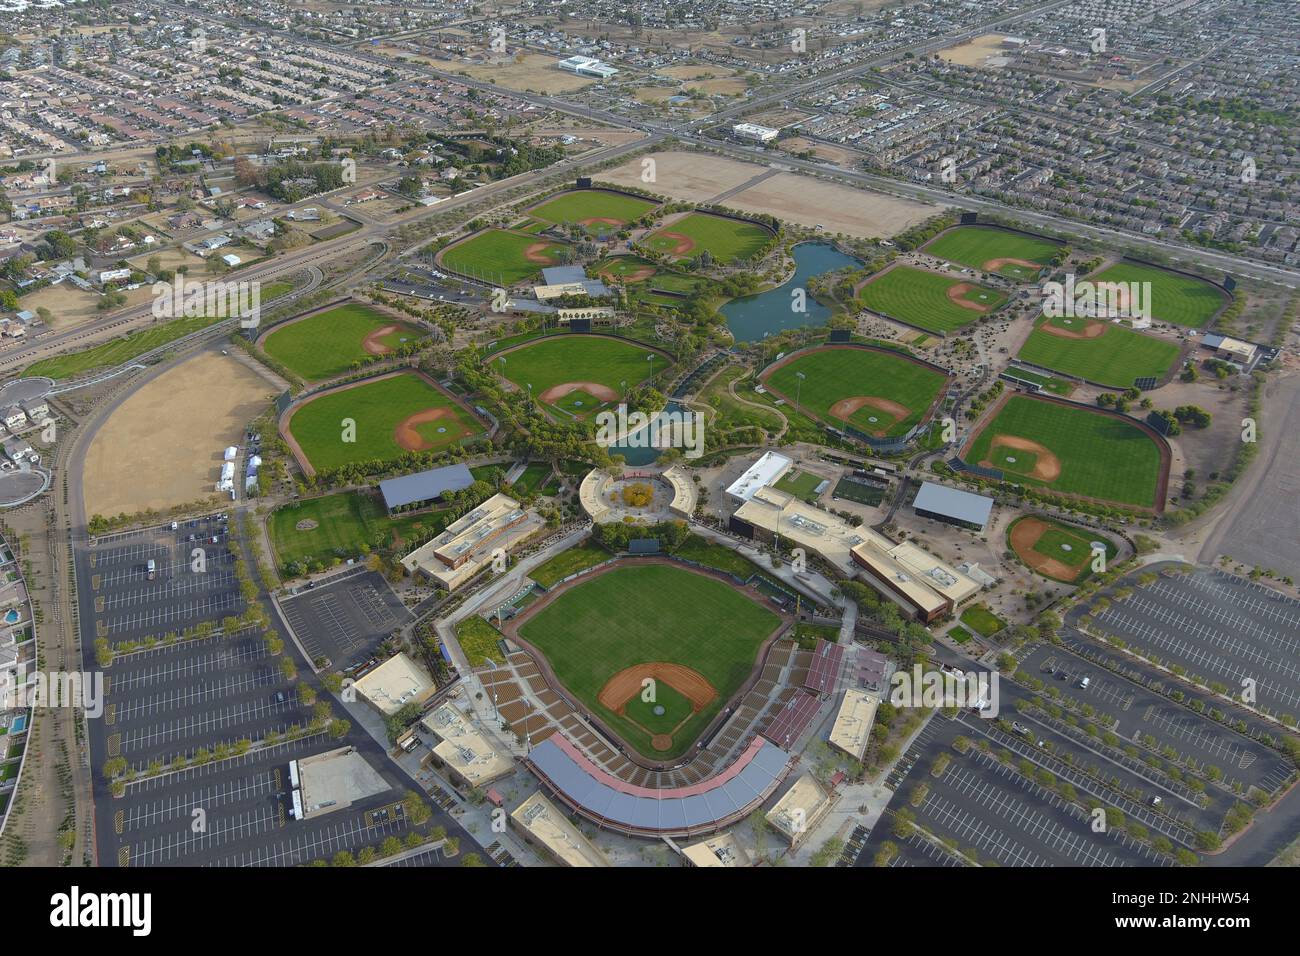 Dodgers Spring Training Facility - Picture of Midtown Garden Hotel